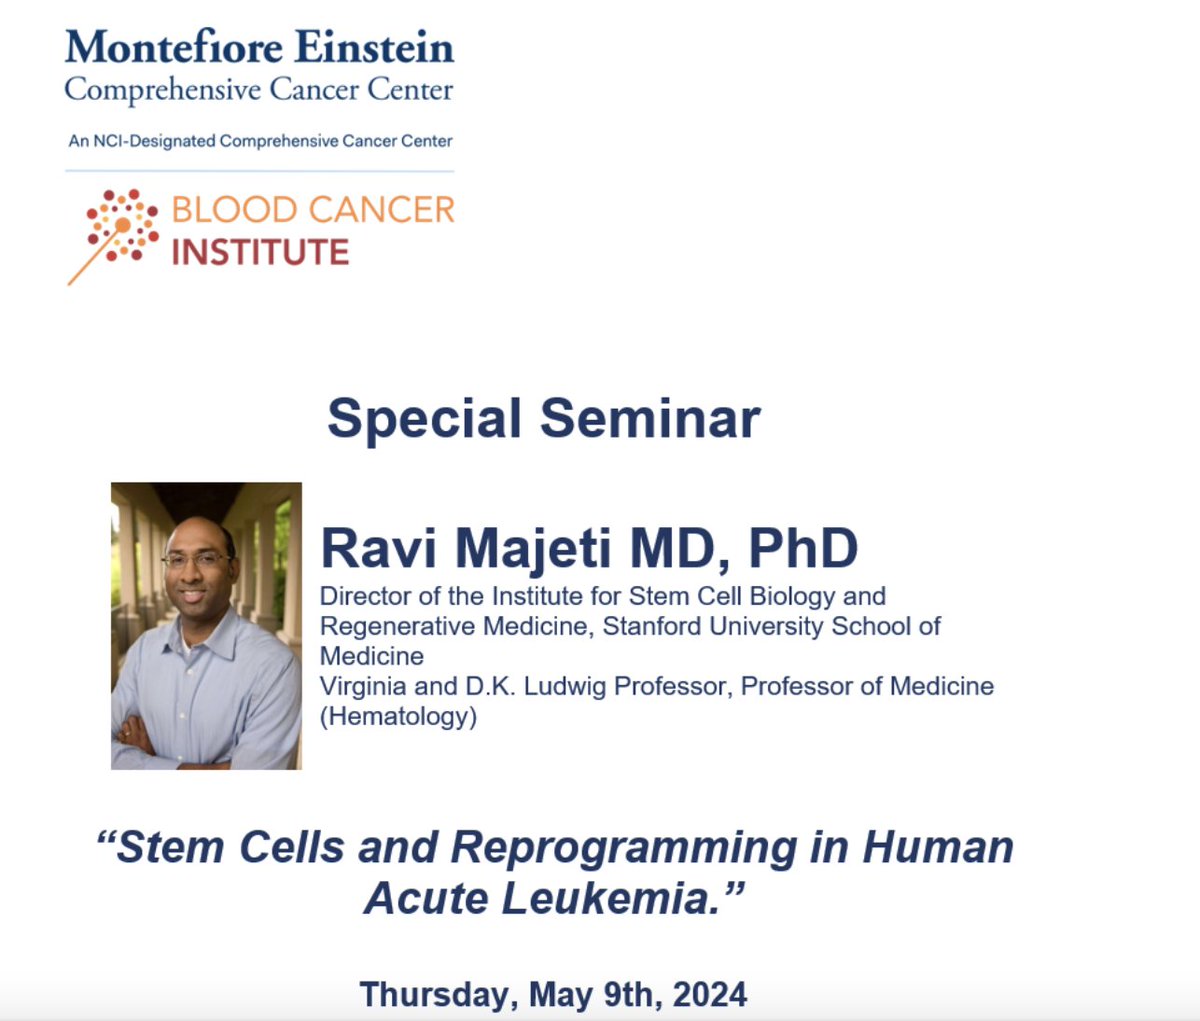 Thank you @majetilab for being @EinsteinMed @MontefioreNYC BCI guest this week and telling us about the exceptional science ongoing in your lab! Not 1 but 3 stories !! @mkonople introducing Dr.Majeti. Come back again!! @Einstein_SCI TY @The_Ito_Lab for co-hosting!!